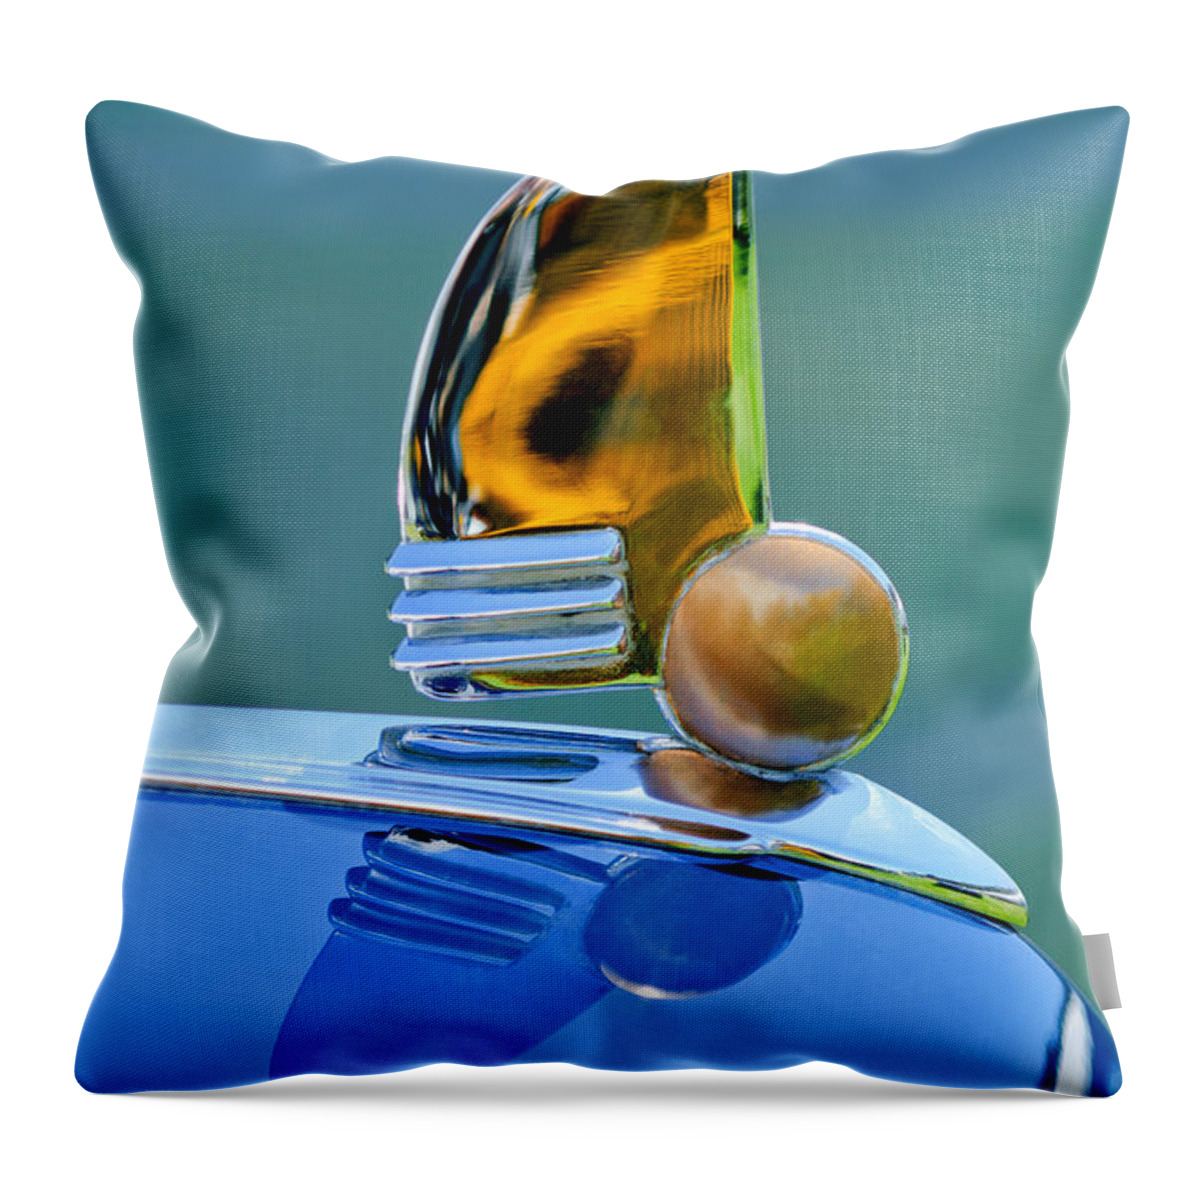 1942 Lincoln Continental Cabriolet Throw Pillow featuring the photograph 1942 Lincoln Continental Cabriolet Hood Ornament by Jill Reger